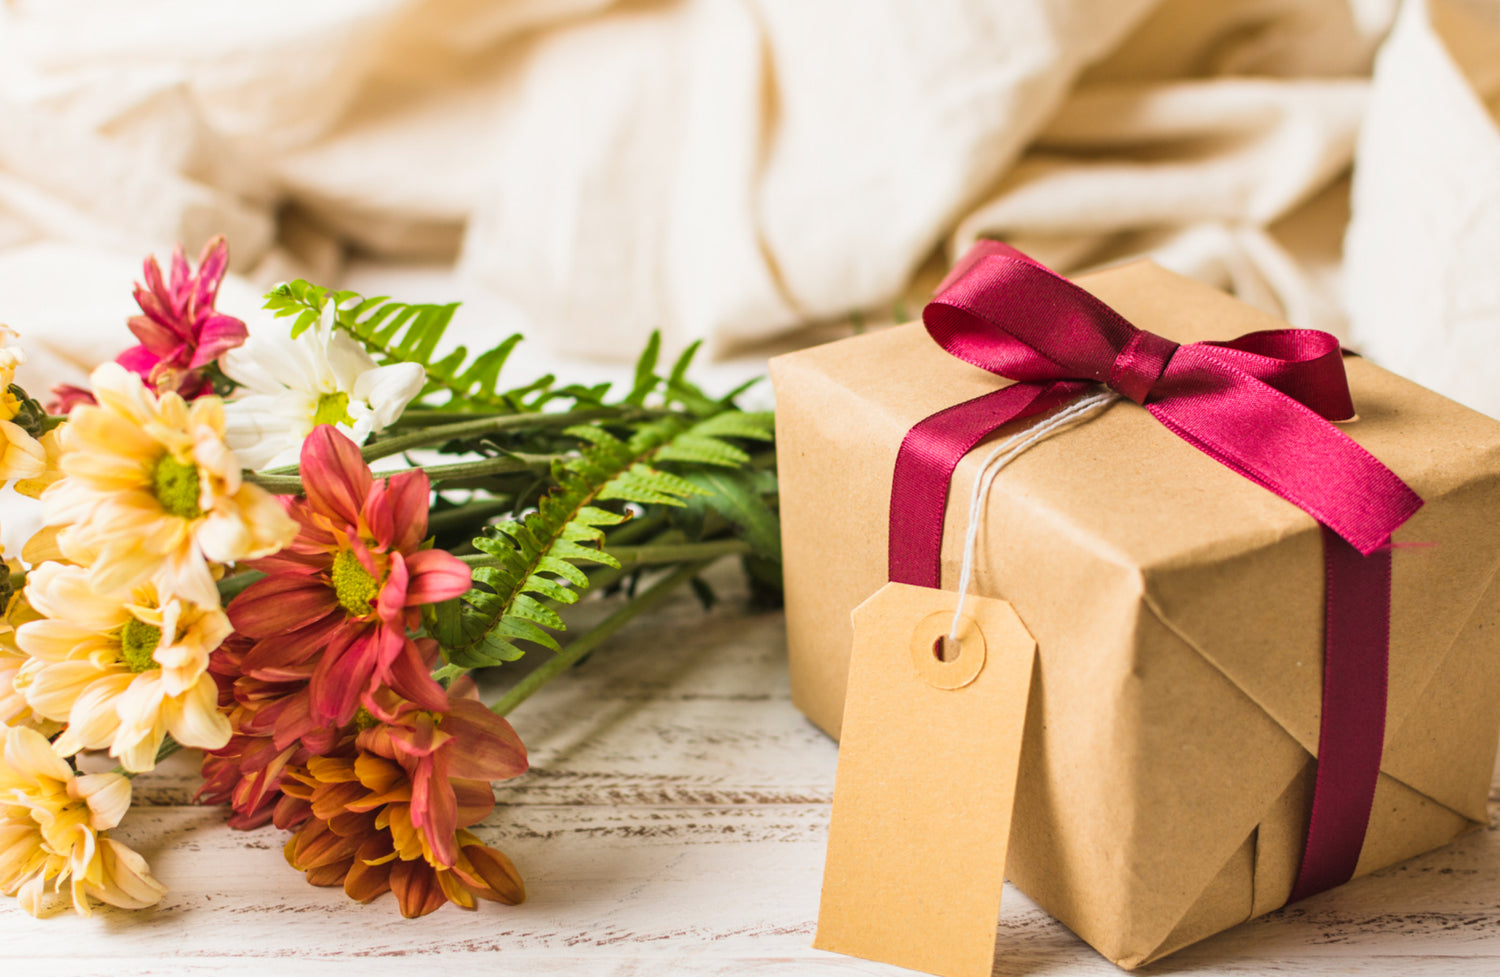 The Philosophy of Spring Gifts: What Makes Them Special